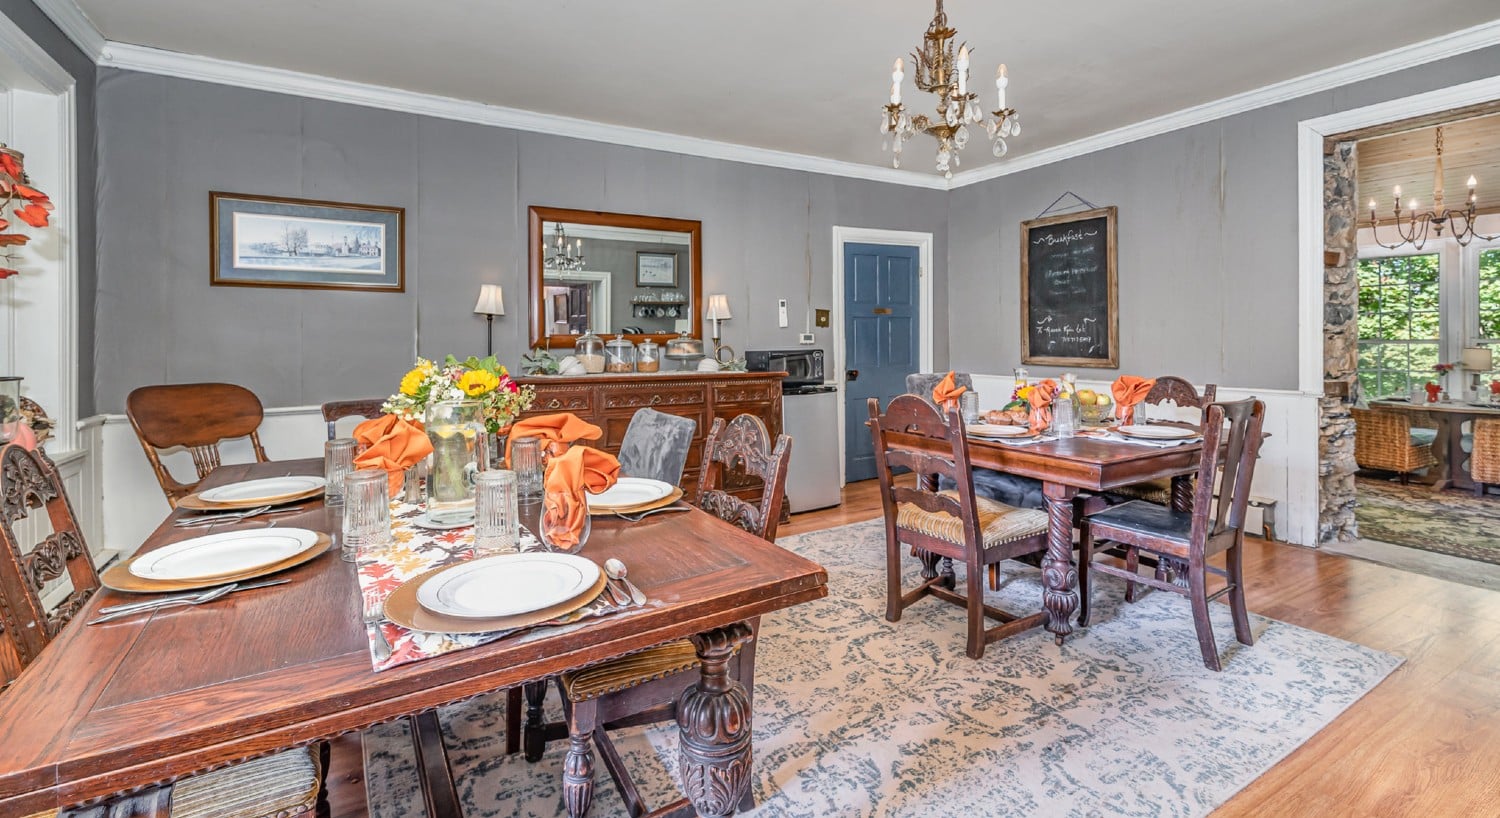 Gorgeous dining area of a home in hues of grey with two tables set for breakfast and doorway into an adjacent room